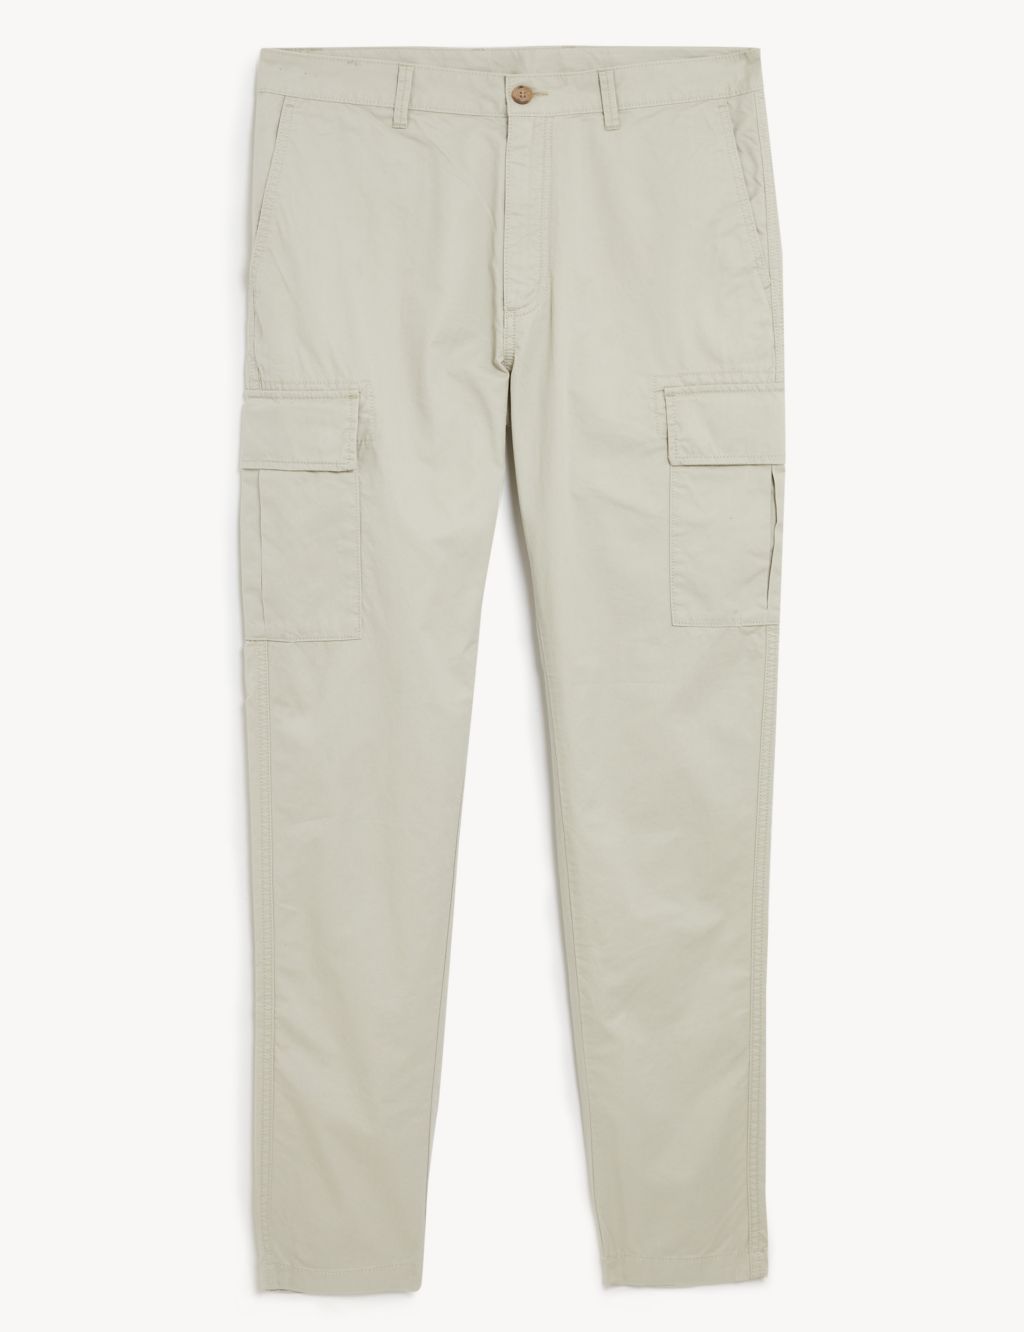 Men's Casual Cargo Trousers | M&S